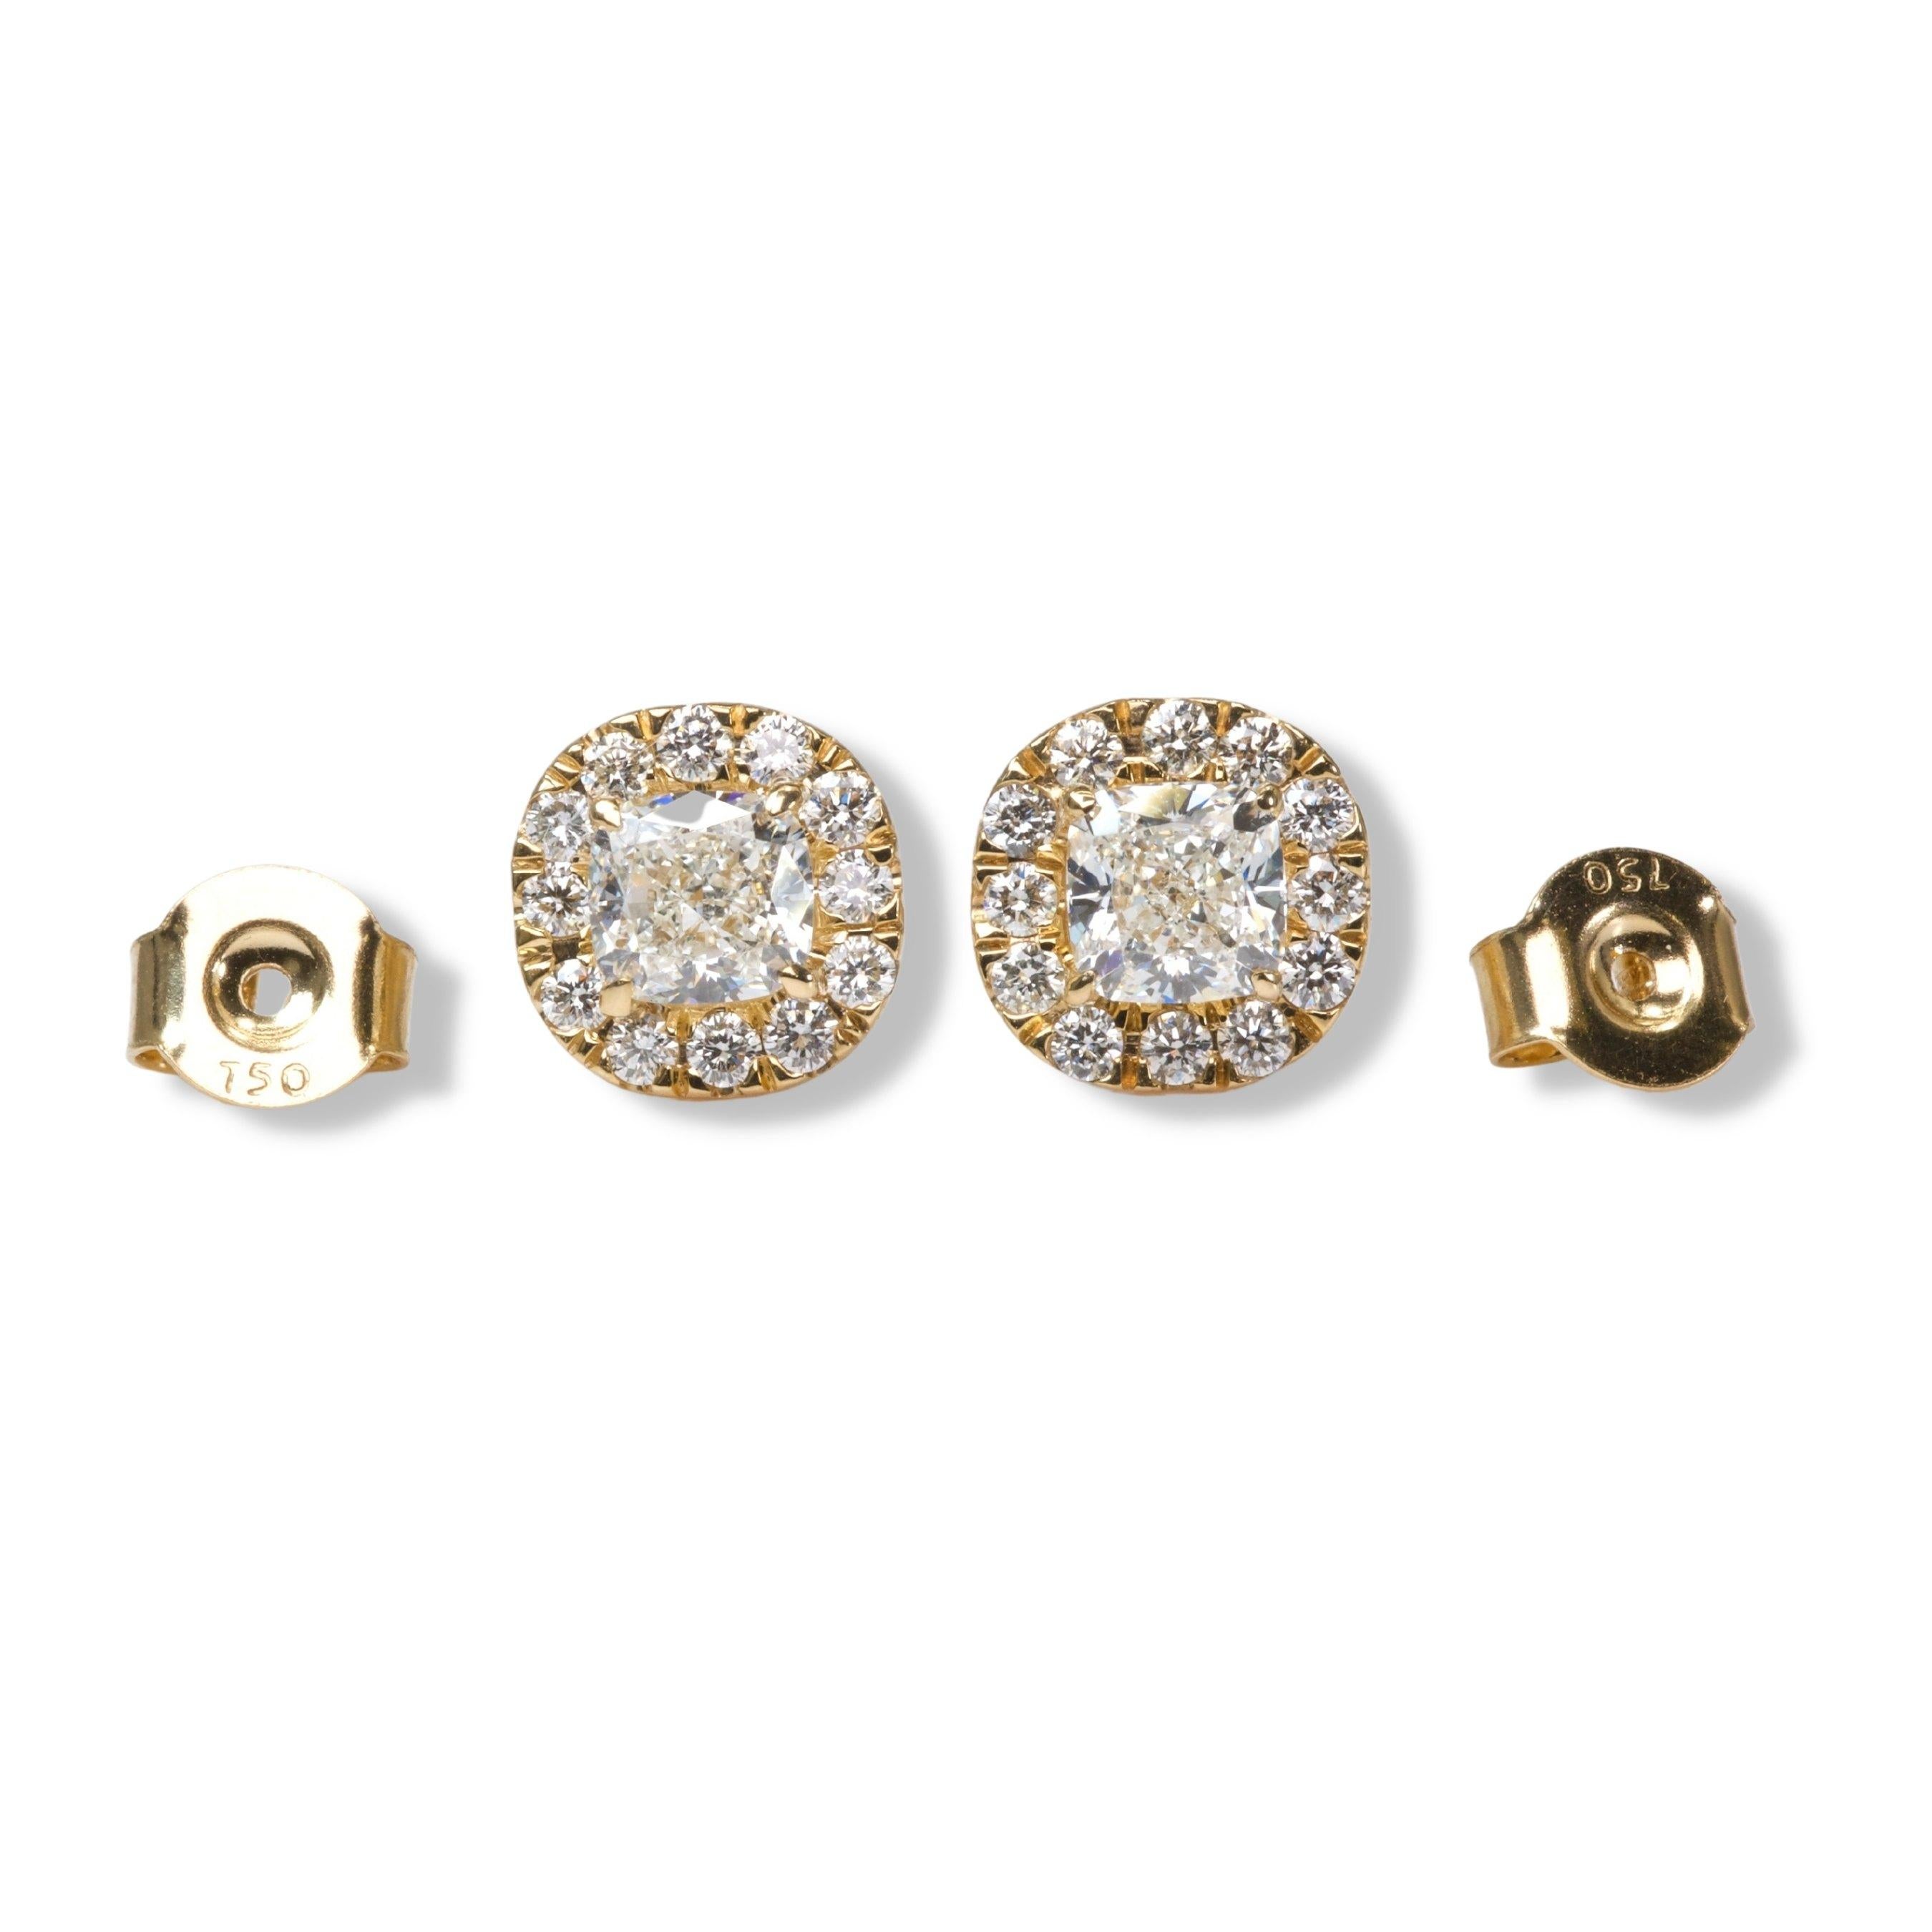 Sparkling 18k Yellow Gold Stud Halo Earrings with 1.40 Diamonds, GIA certificate For Sale 3